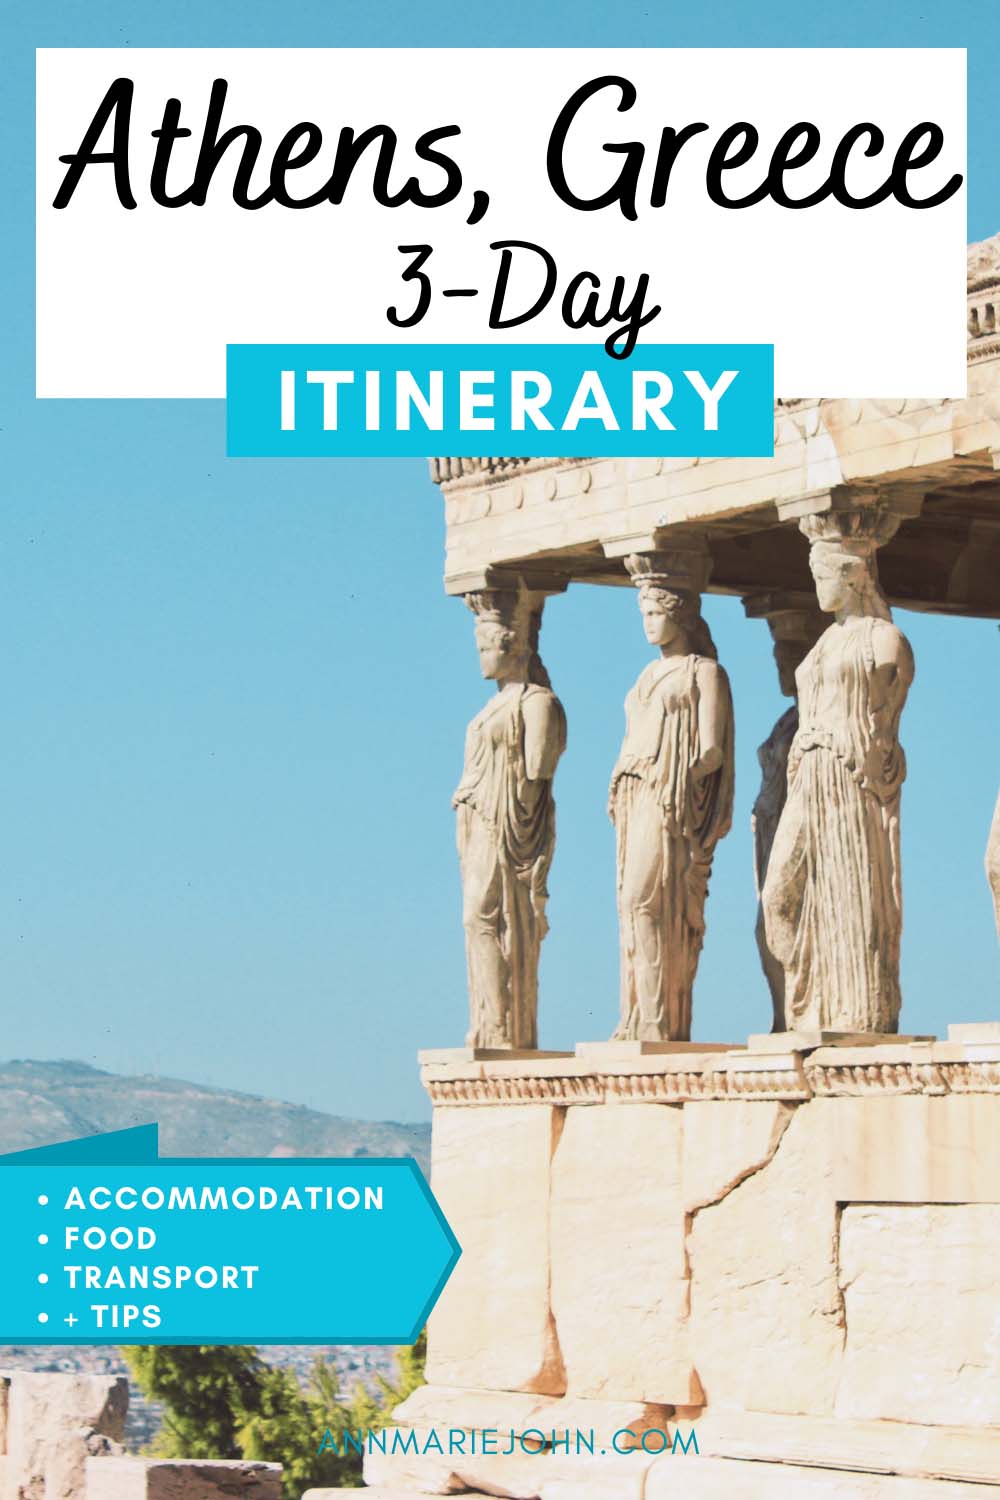 Athens, Greece 3-Day Itinerary